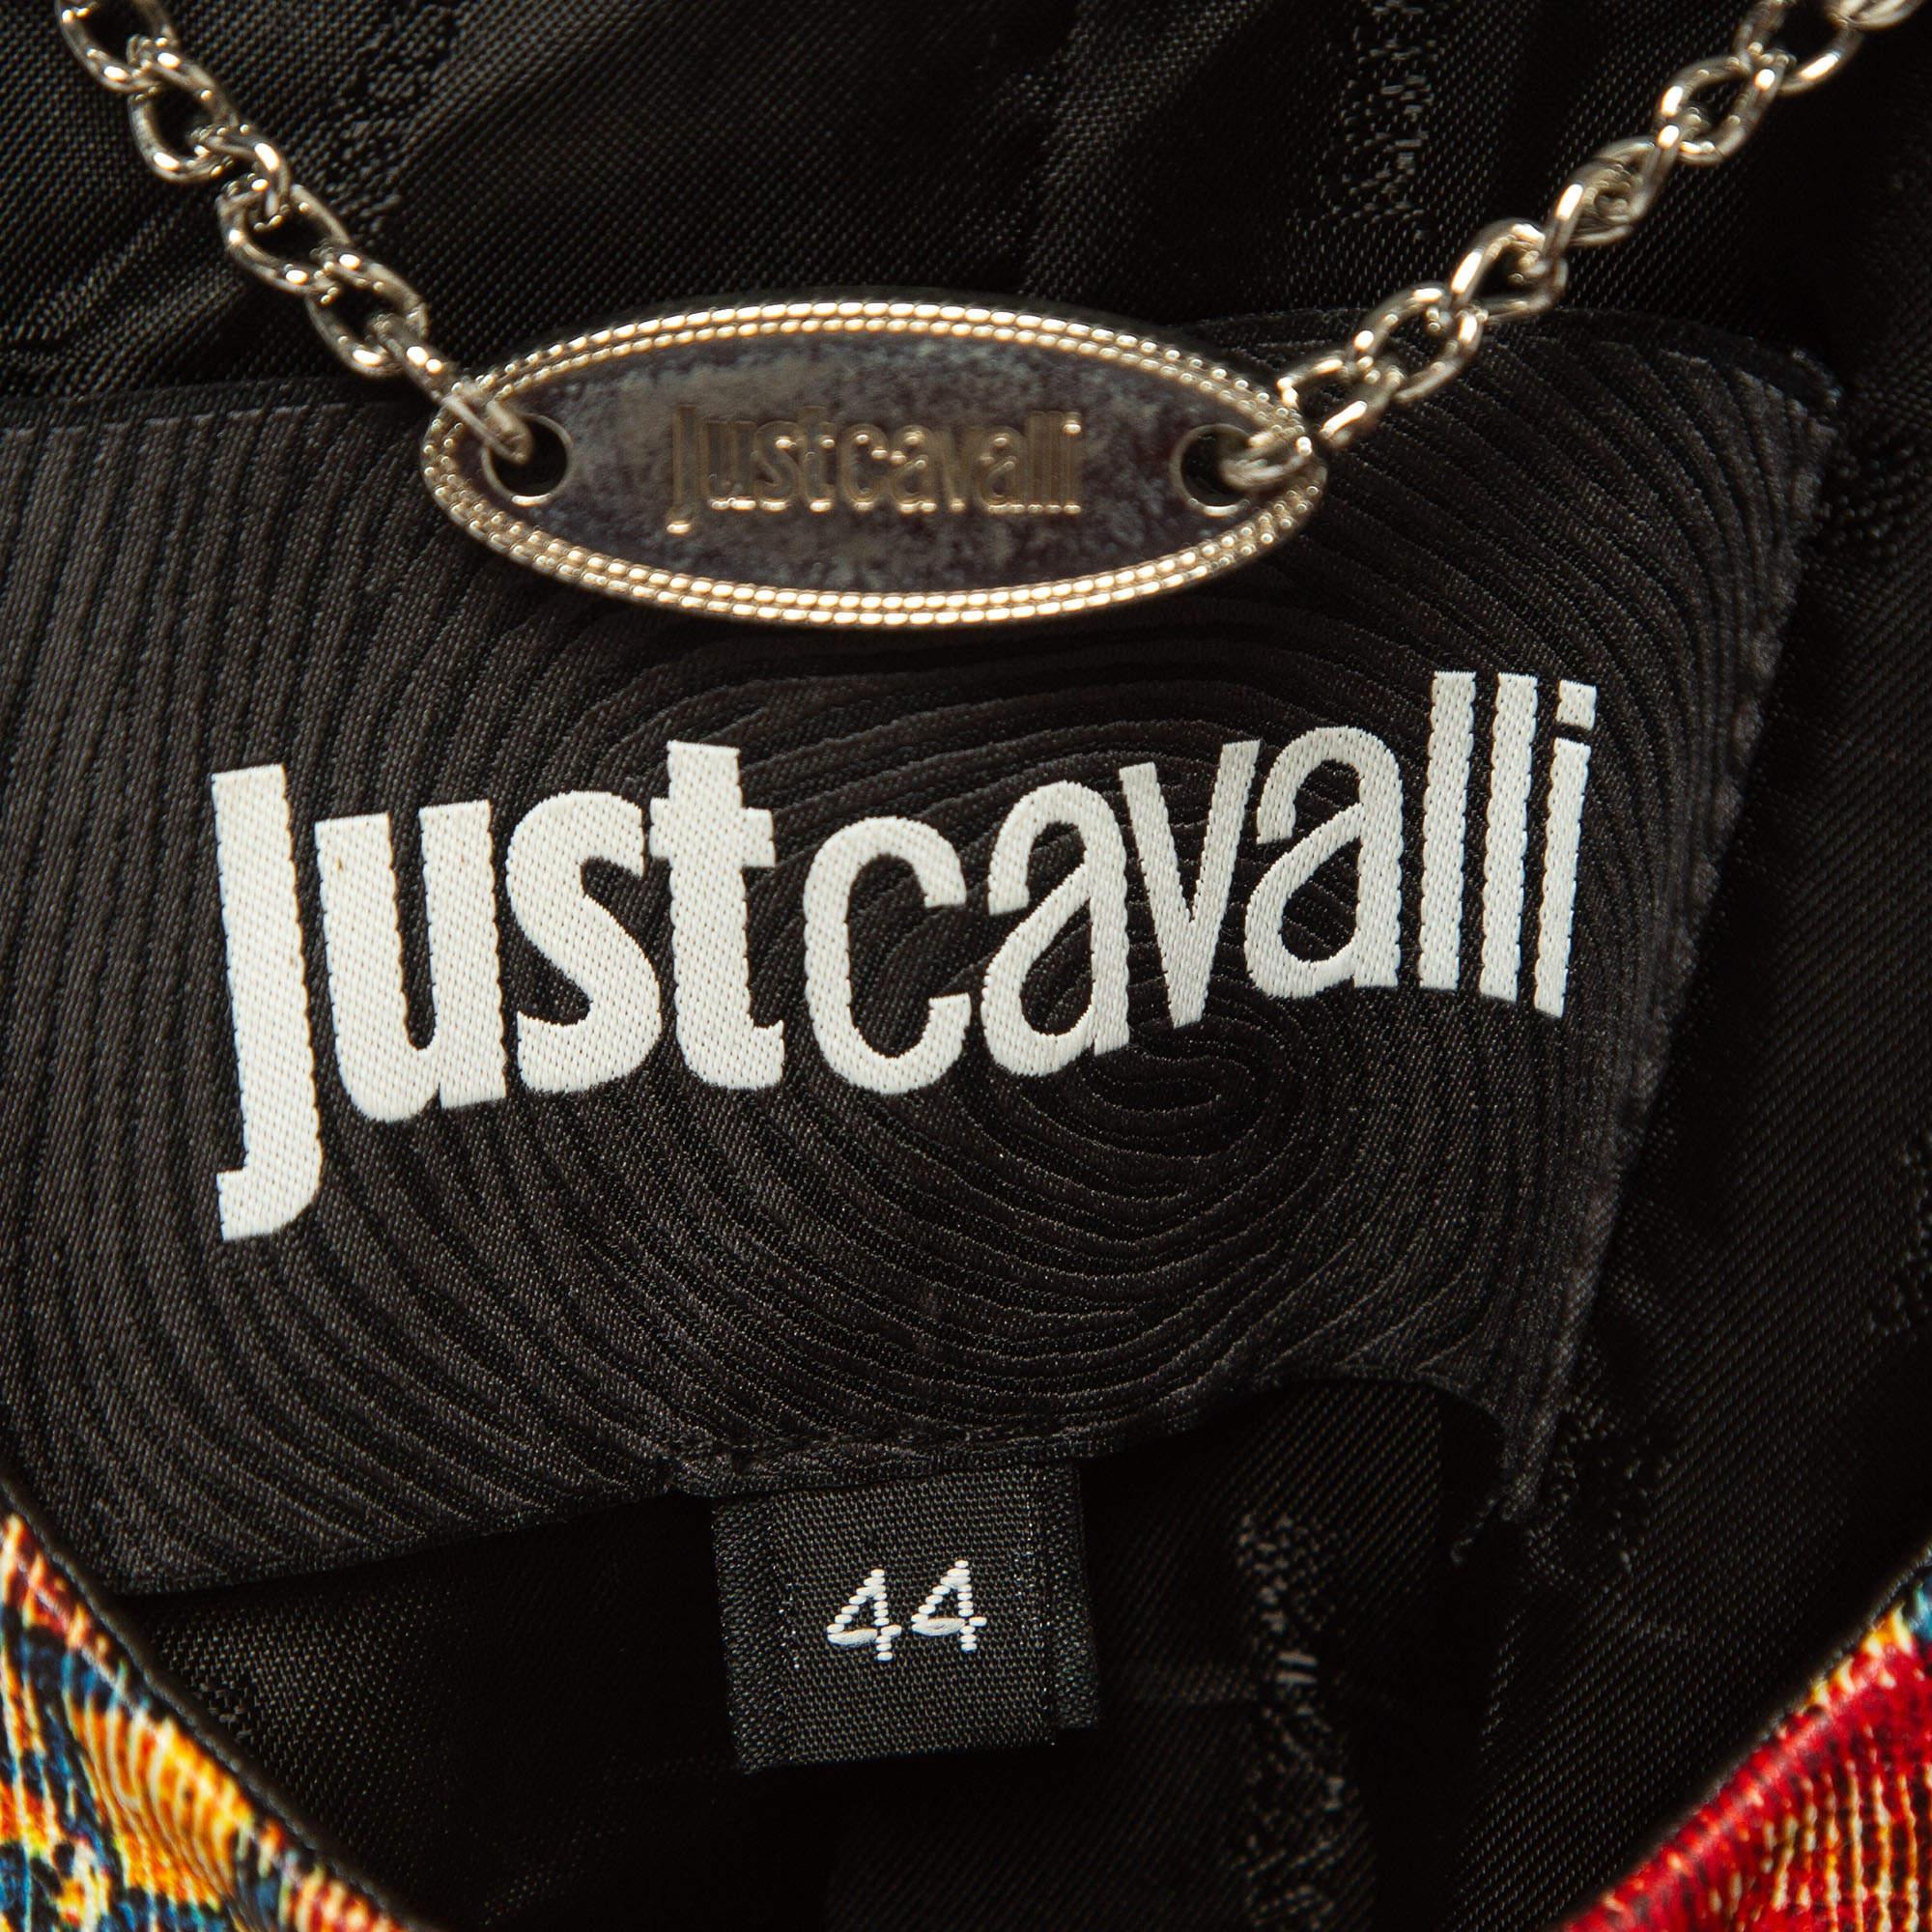 Elevate your style with the Just Cavalli jacket. Crafted from luxurious leather, its intricate prints exude urban sophistication. This piece merges edgy details with refined elegance, offering a statement look tailored for the modern fashion